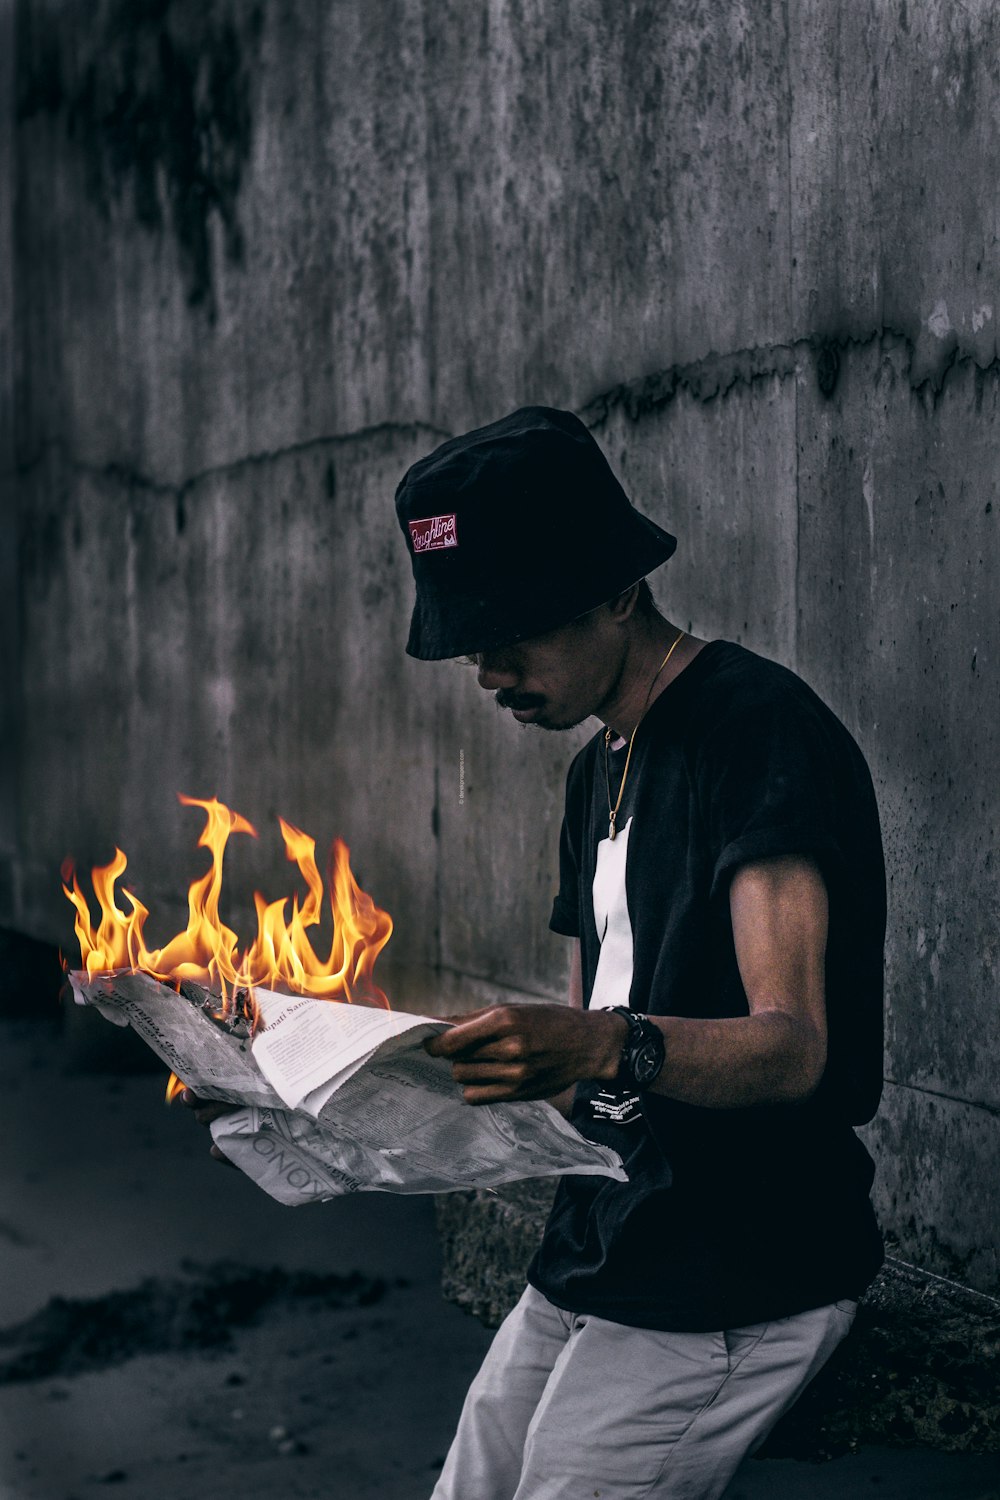 unknown person holding lit newspaper